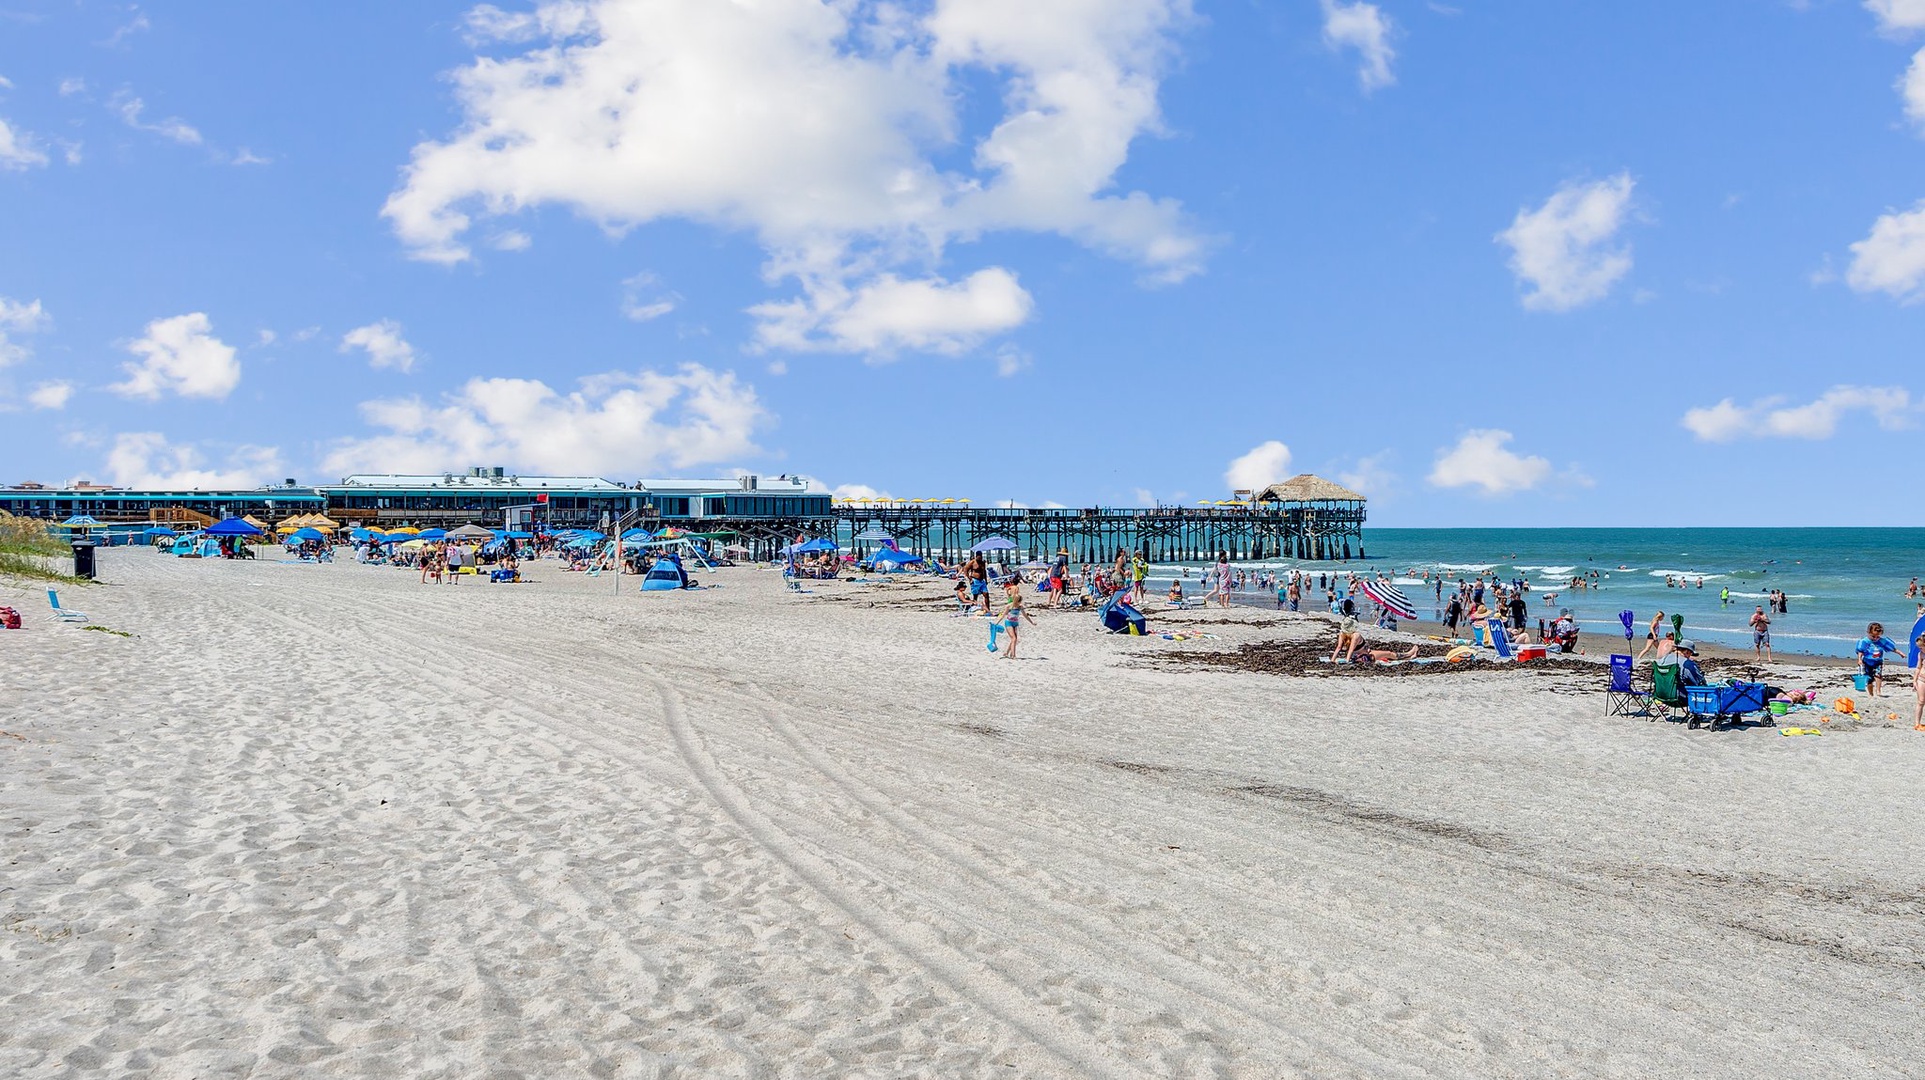 Enjoy being mere steps away from the beach during your visit to Cocoa Beach